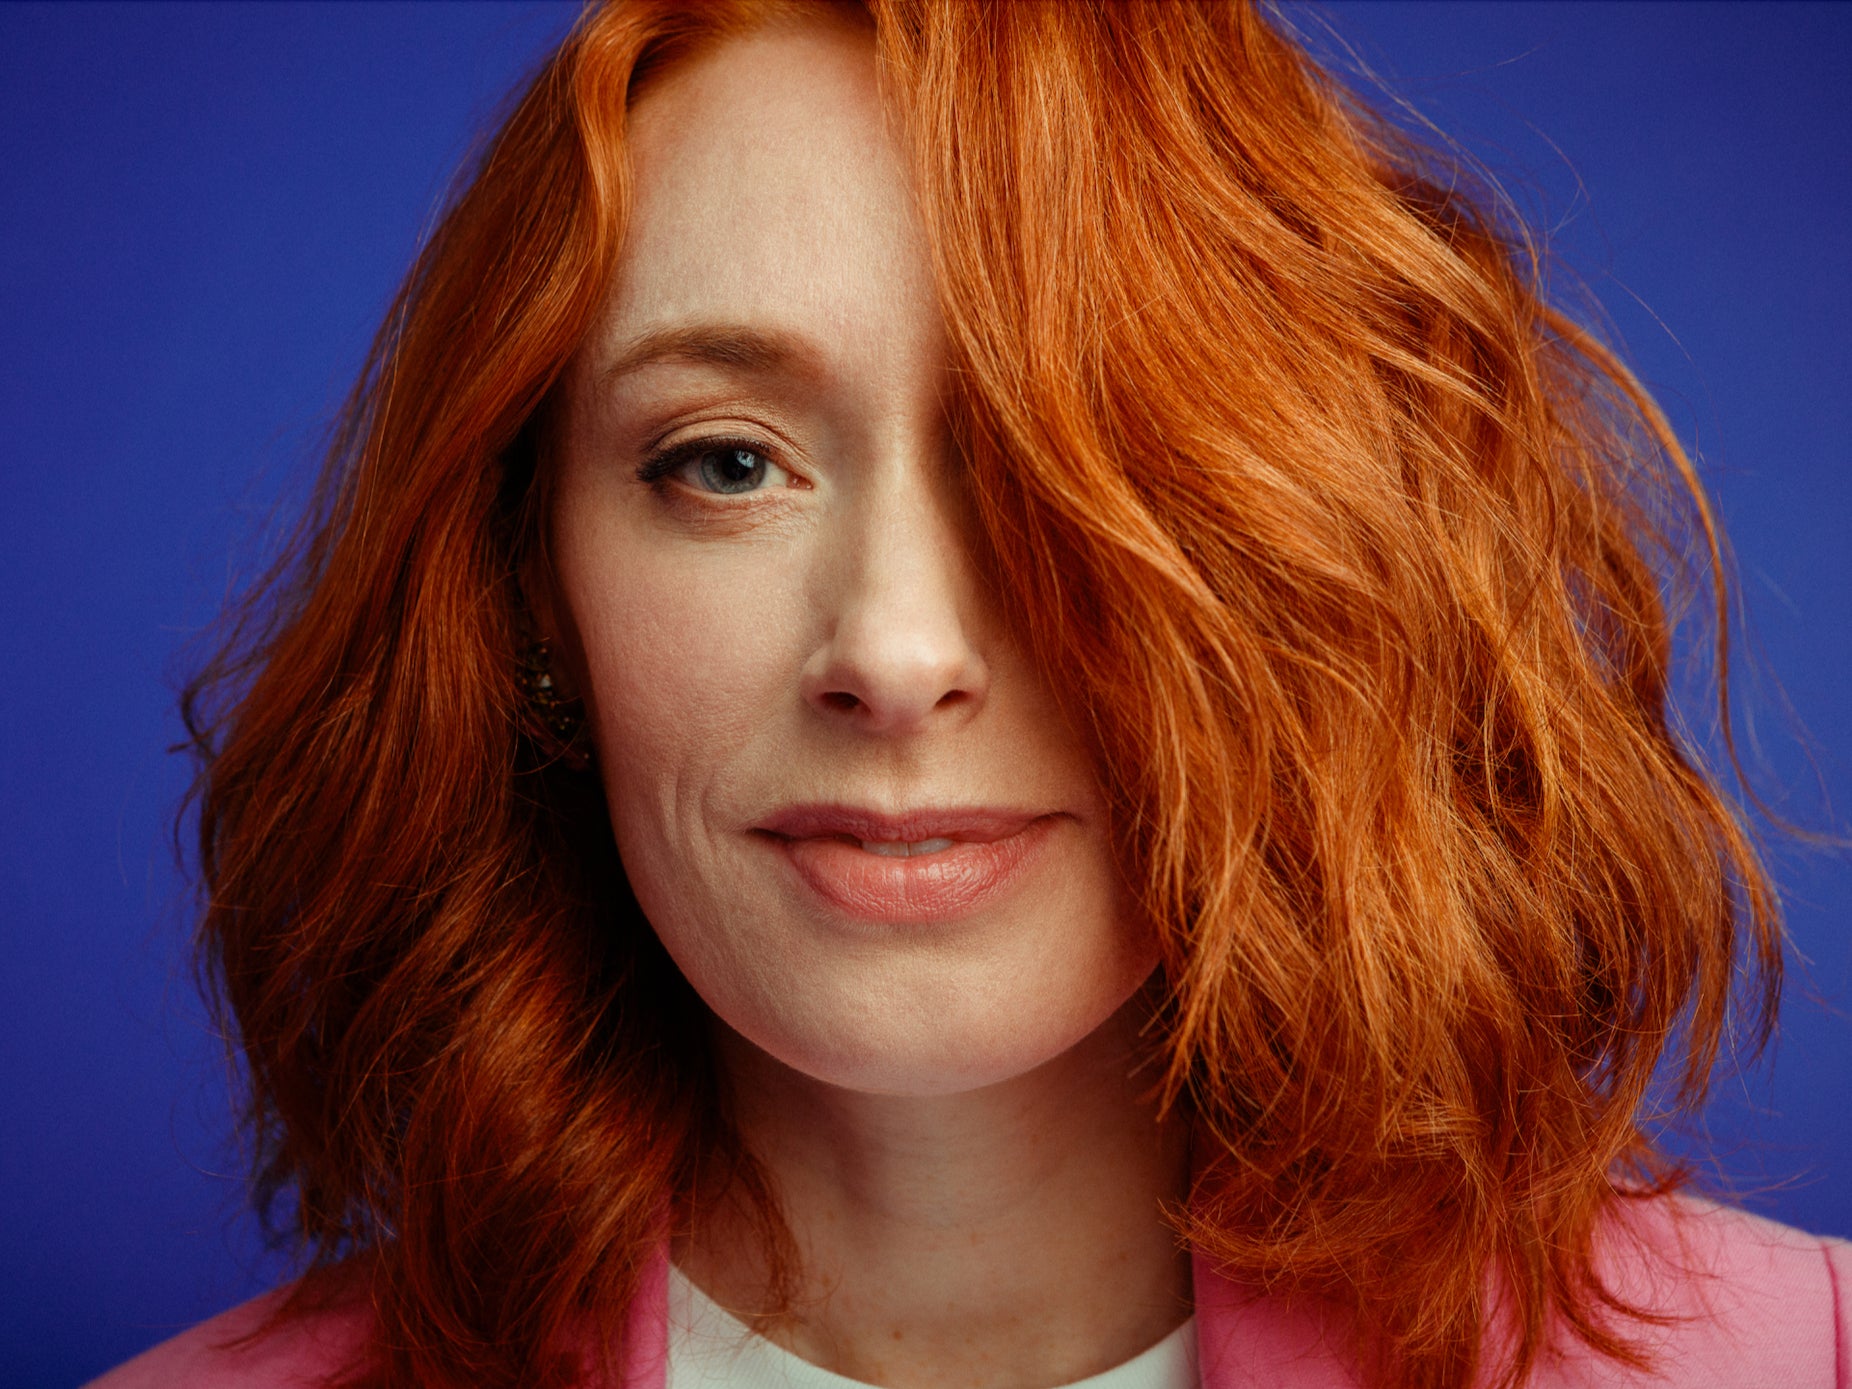 Mathematics of Love author Hannah Fry When you have cancer, youre just like, “Get it out of me, Im terrified” The Independent pic